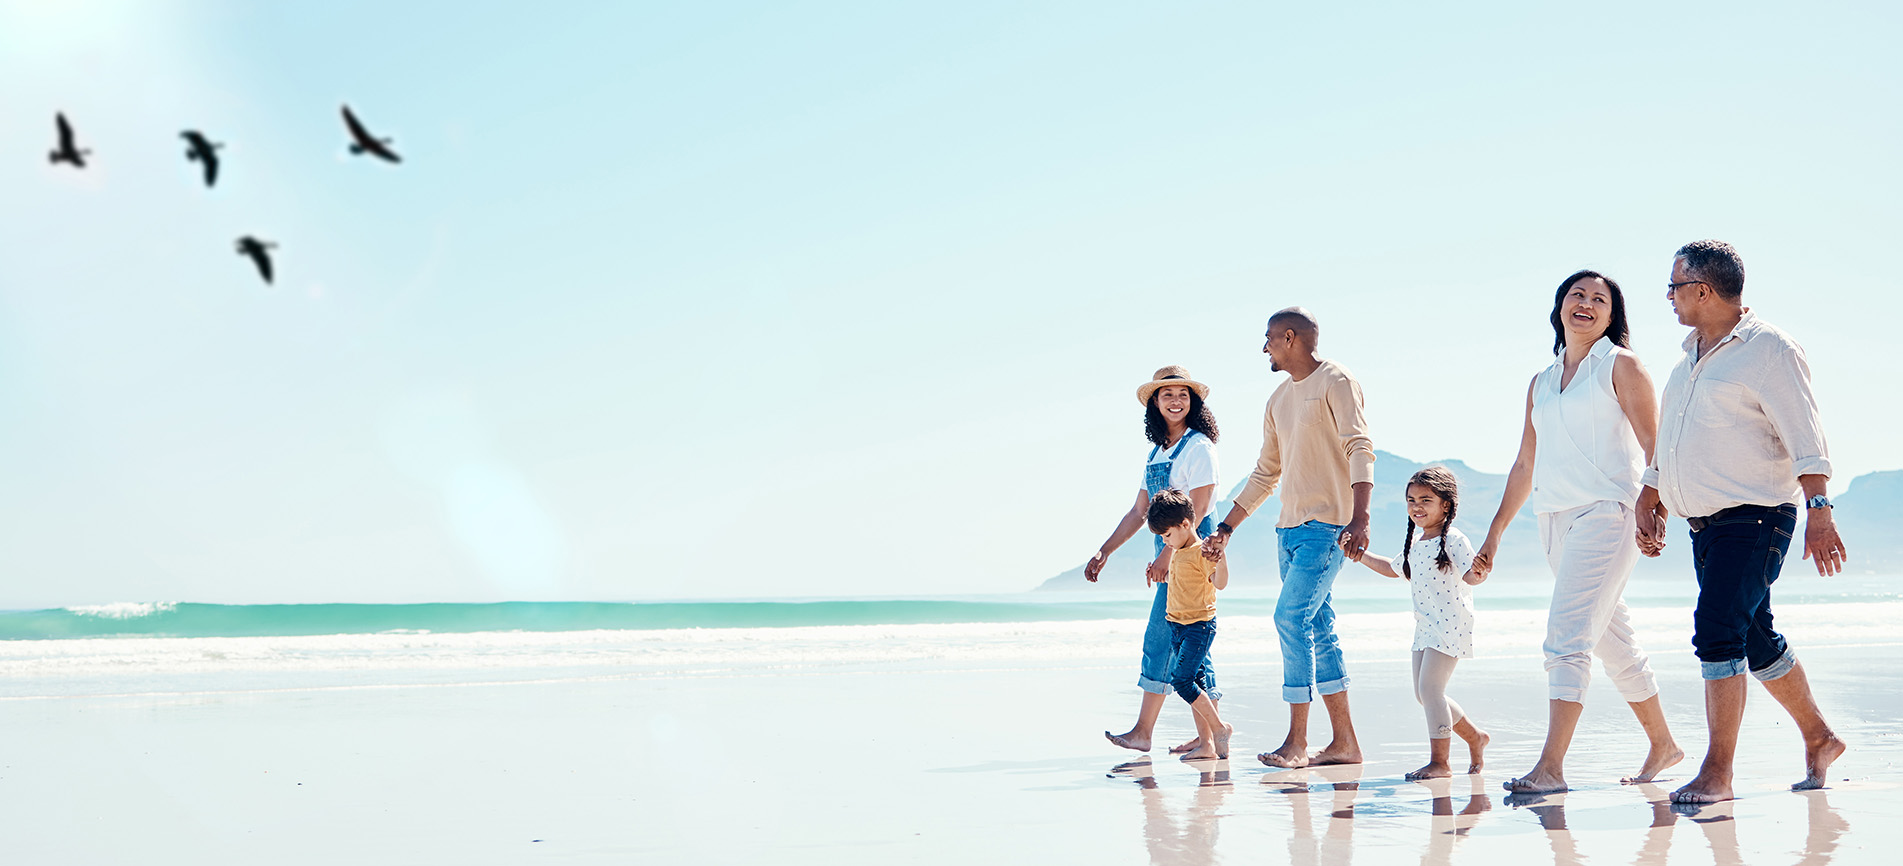 A family with their children and parents walks along ocean on the beach on a bright sunny day with birds flying overhead.